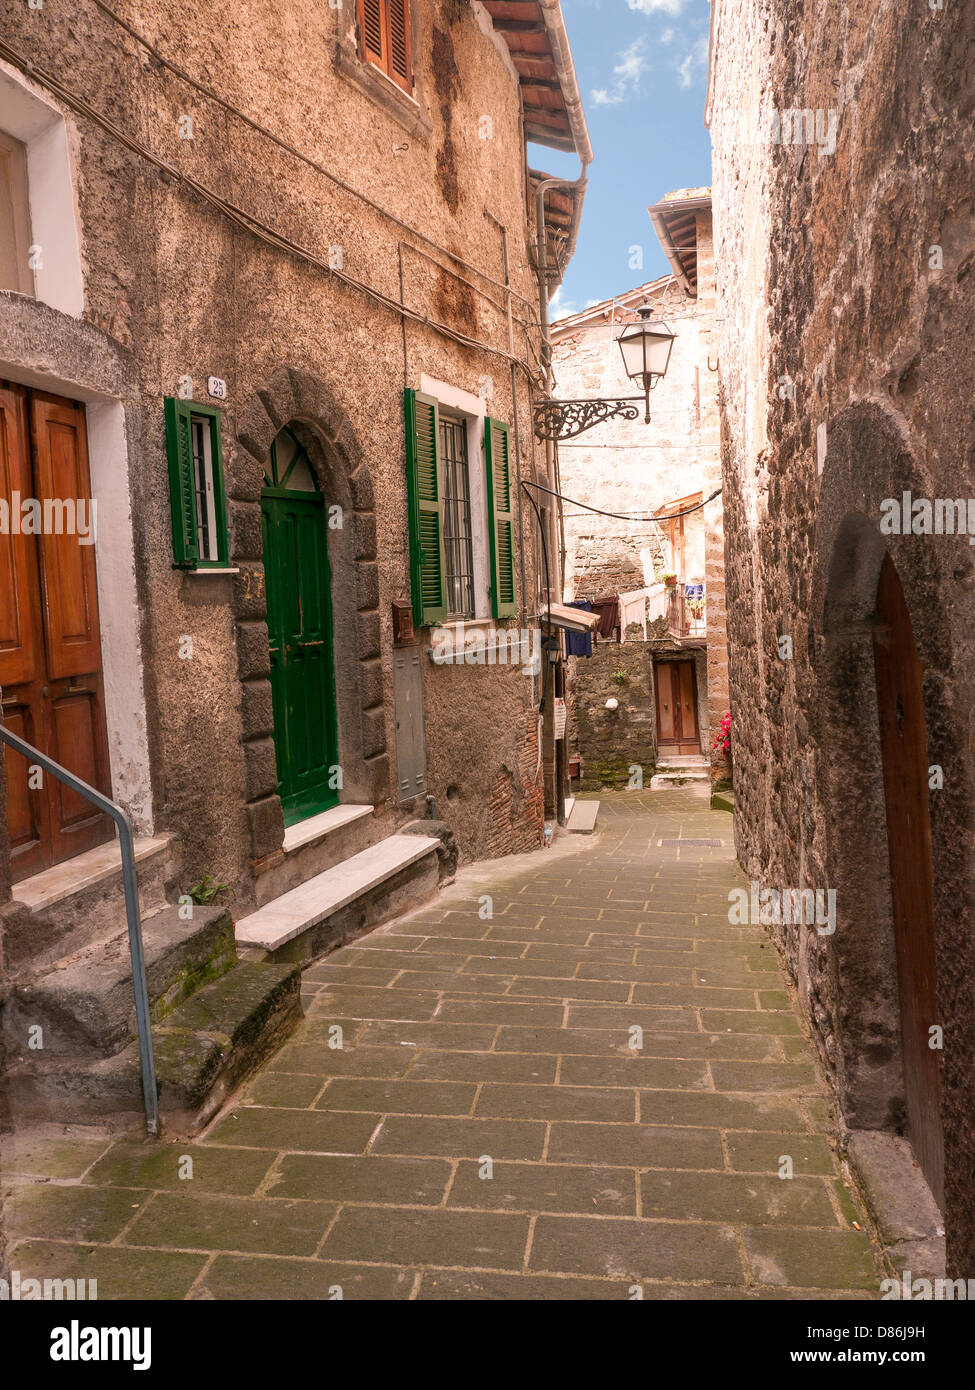 A street in the medieval hill top town of Soriano nel Cimino, Umbria, Italy Stock Photo